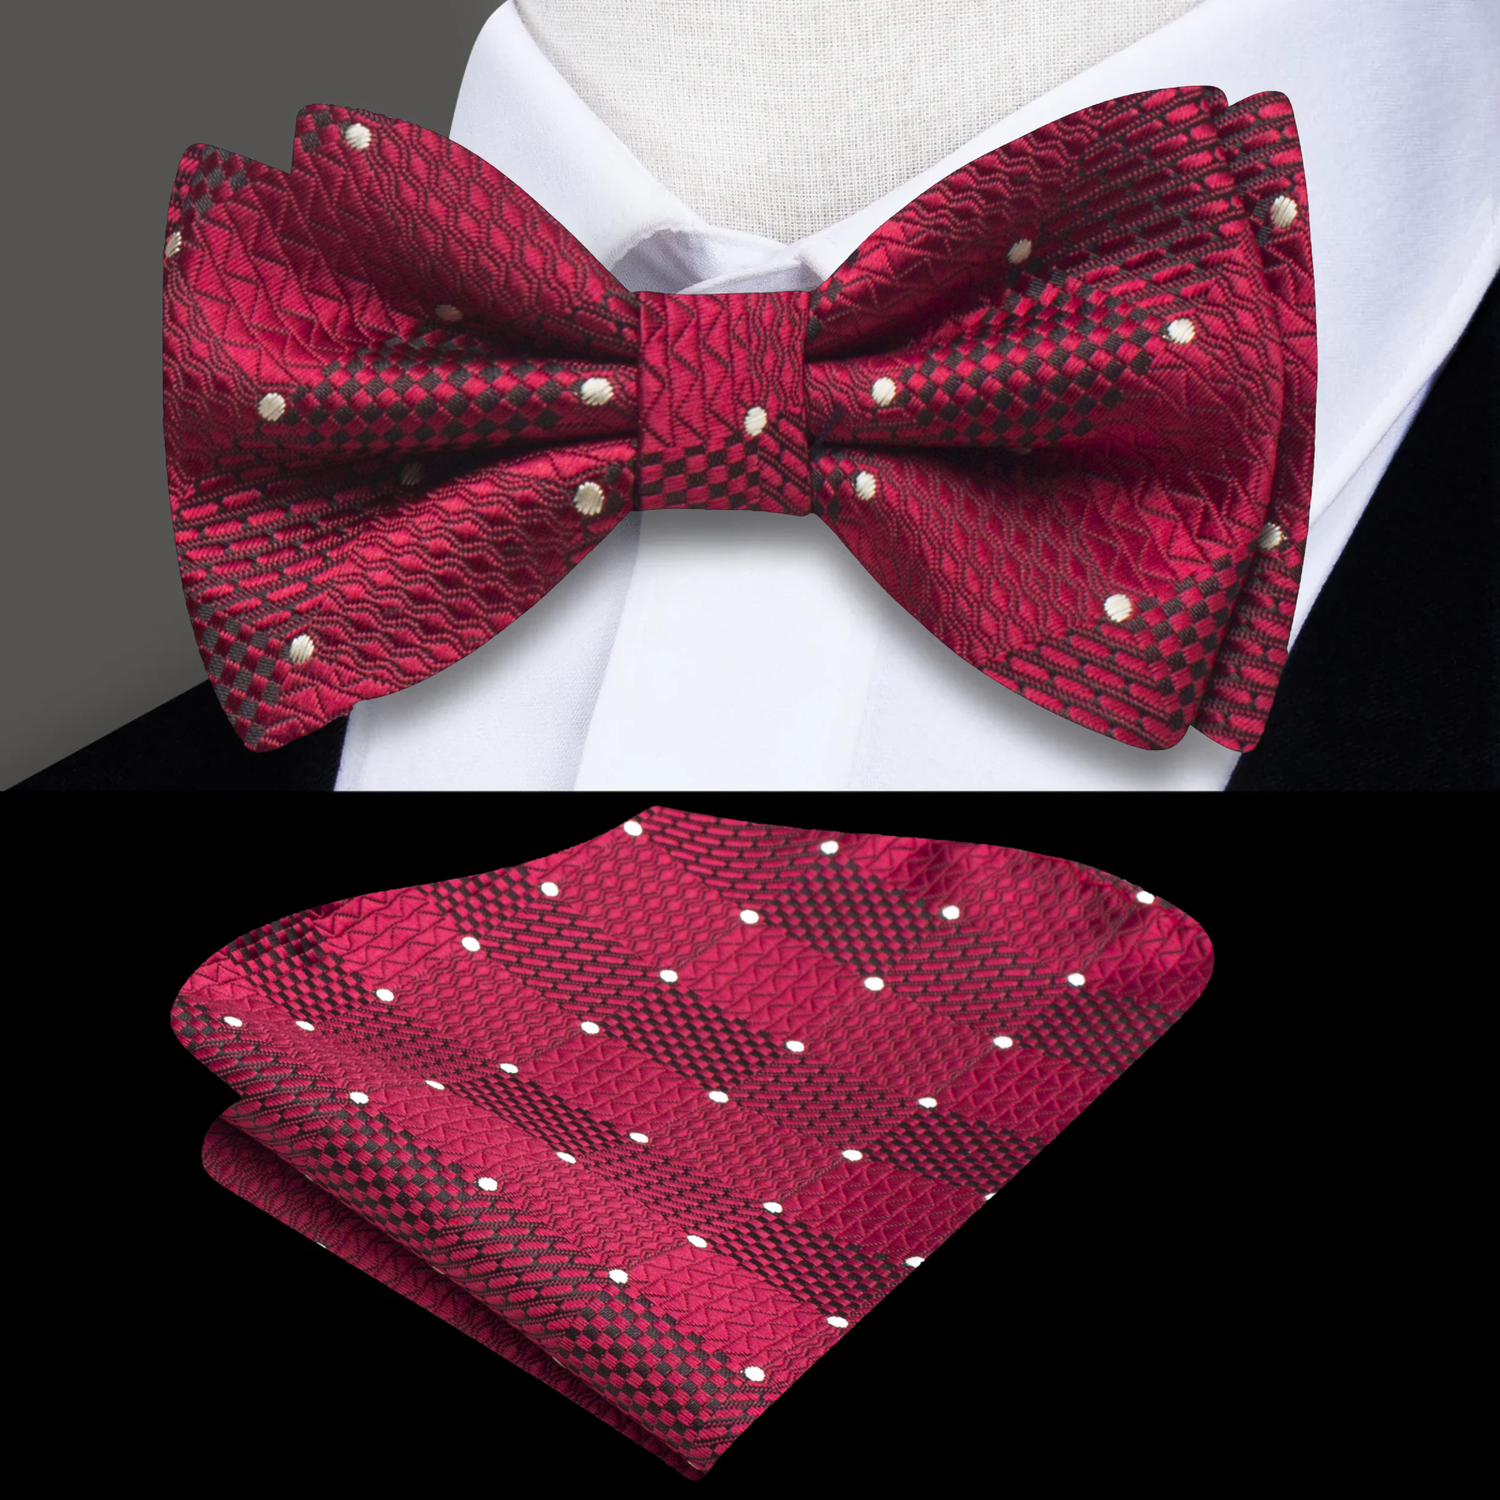 A Burgundy, White Geometric With Dot Pattern Silk Self Tie Bow Tie, Matching Pocket Square